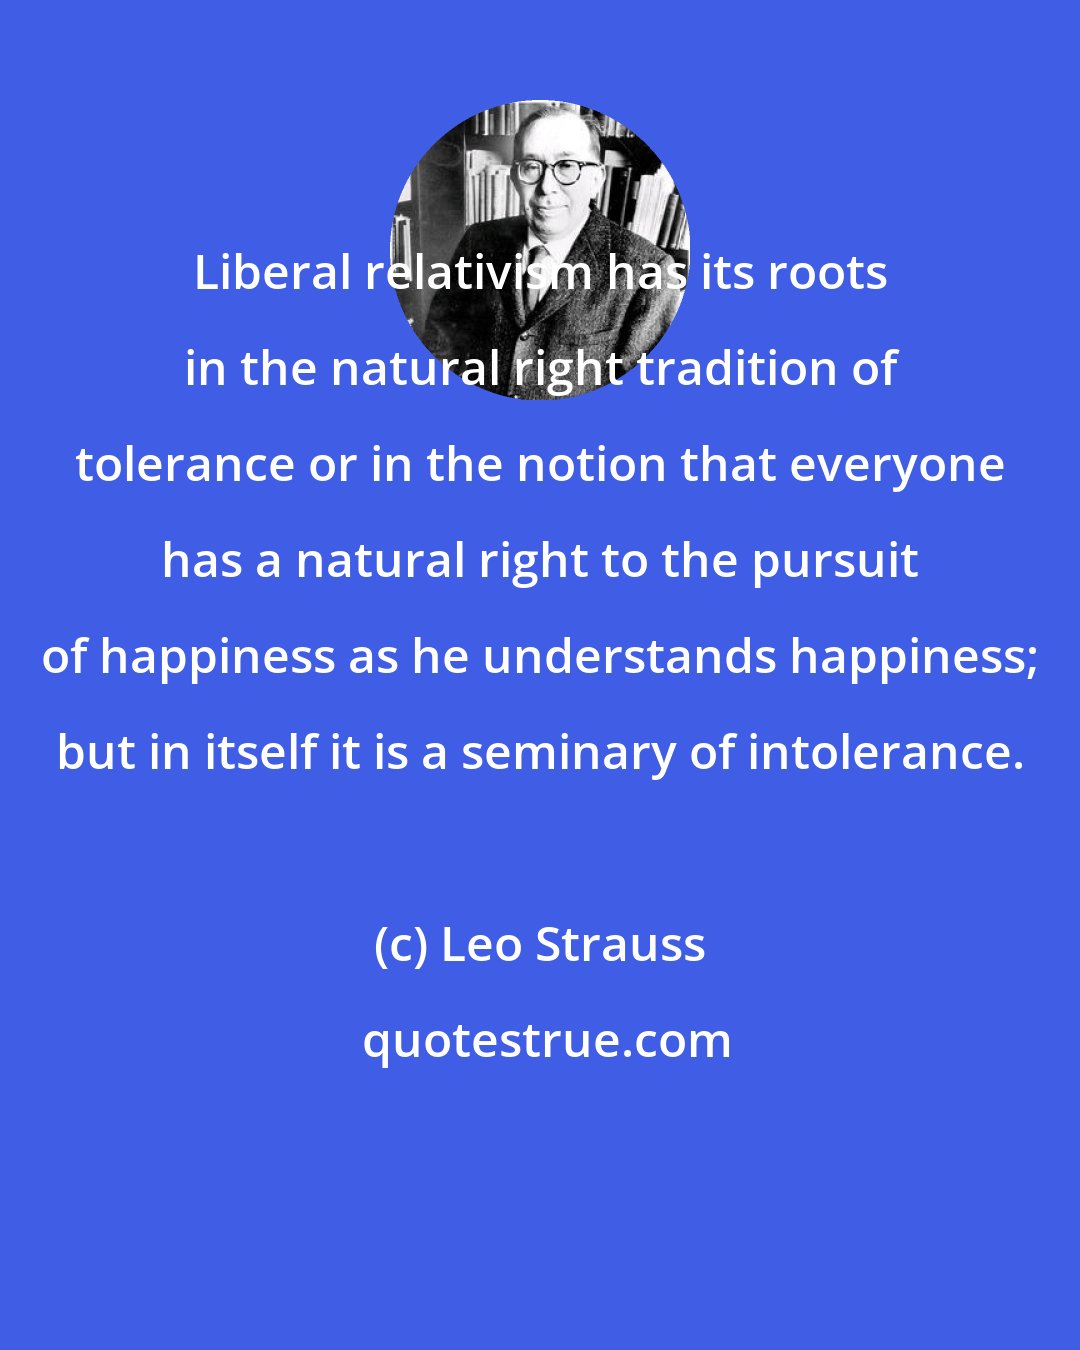 Leo Strauss: Liberal relativism has its roots in the natural right tradition of tolerance or in the notion that everyone has a natural right to the pursuit of happiness as he understands happiness; but in itself it is a seminary of intolerance.